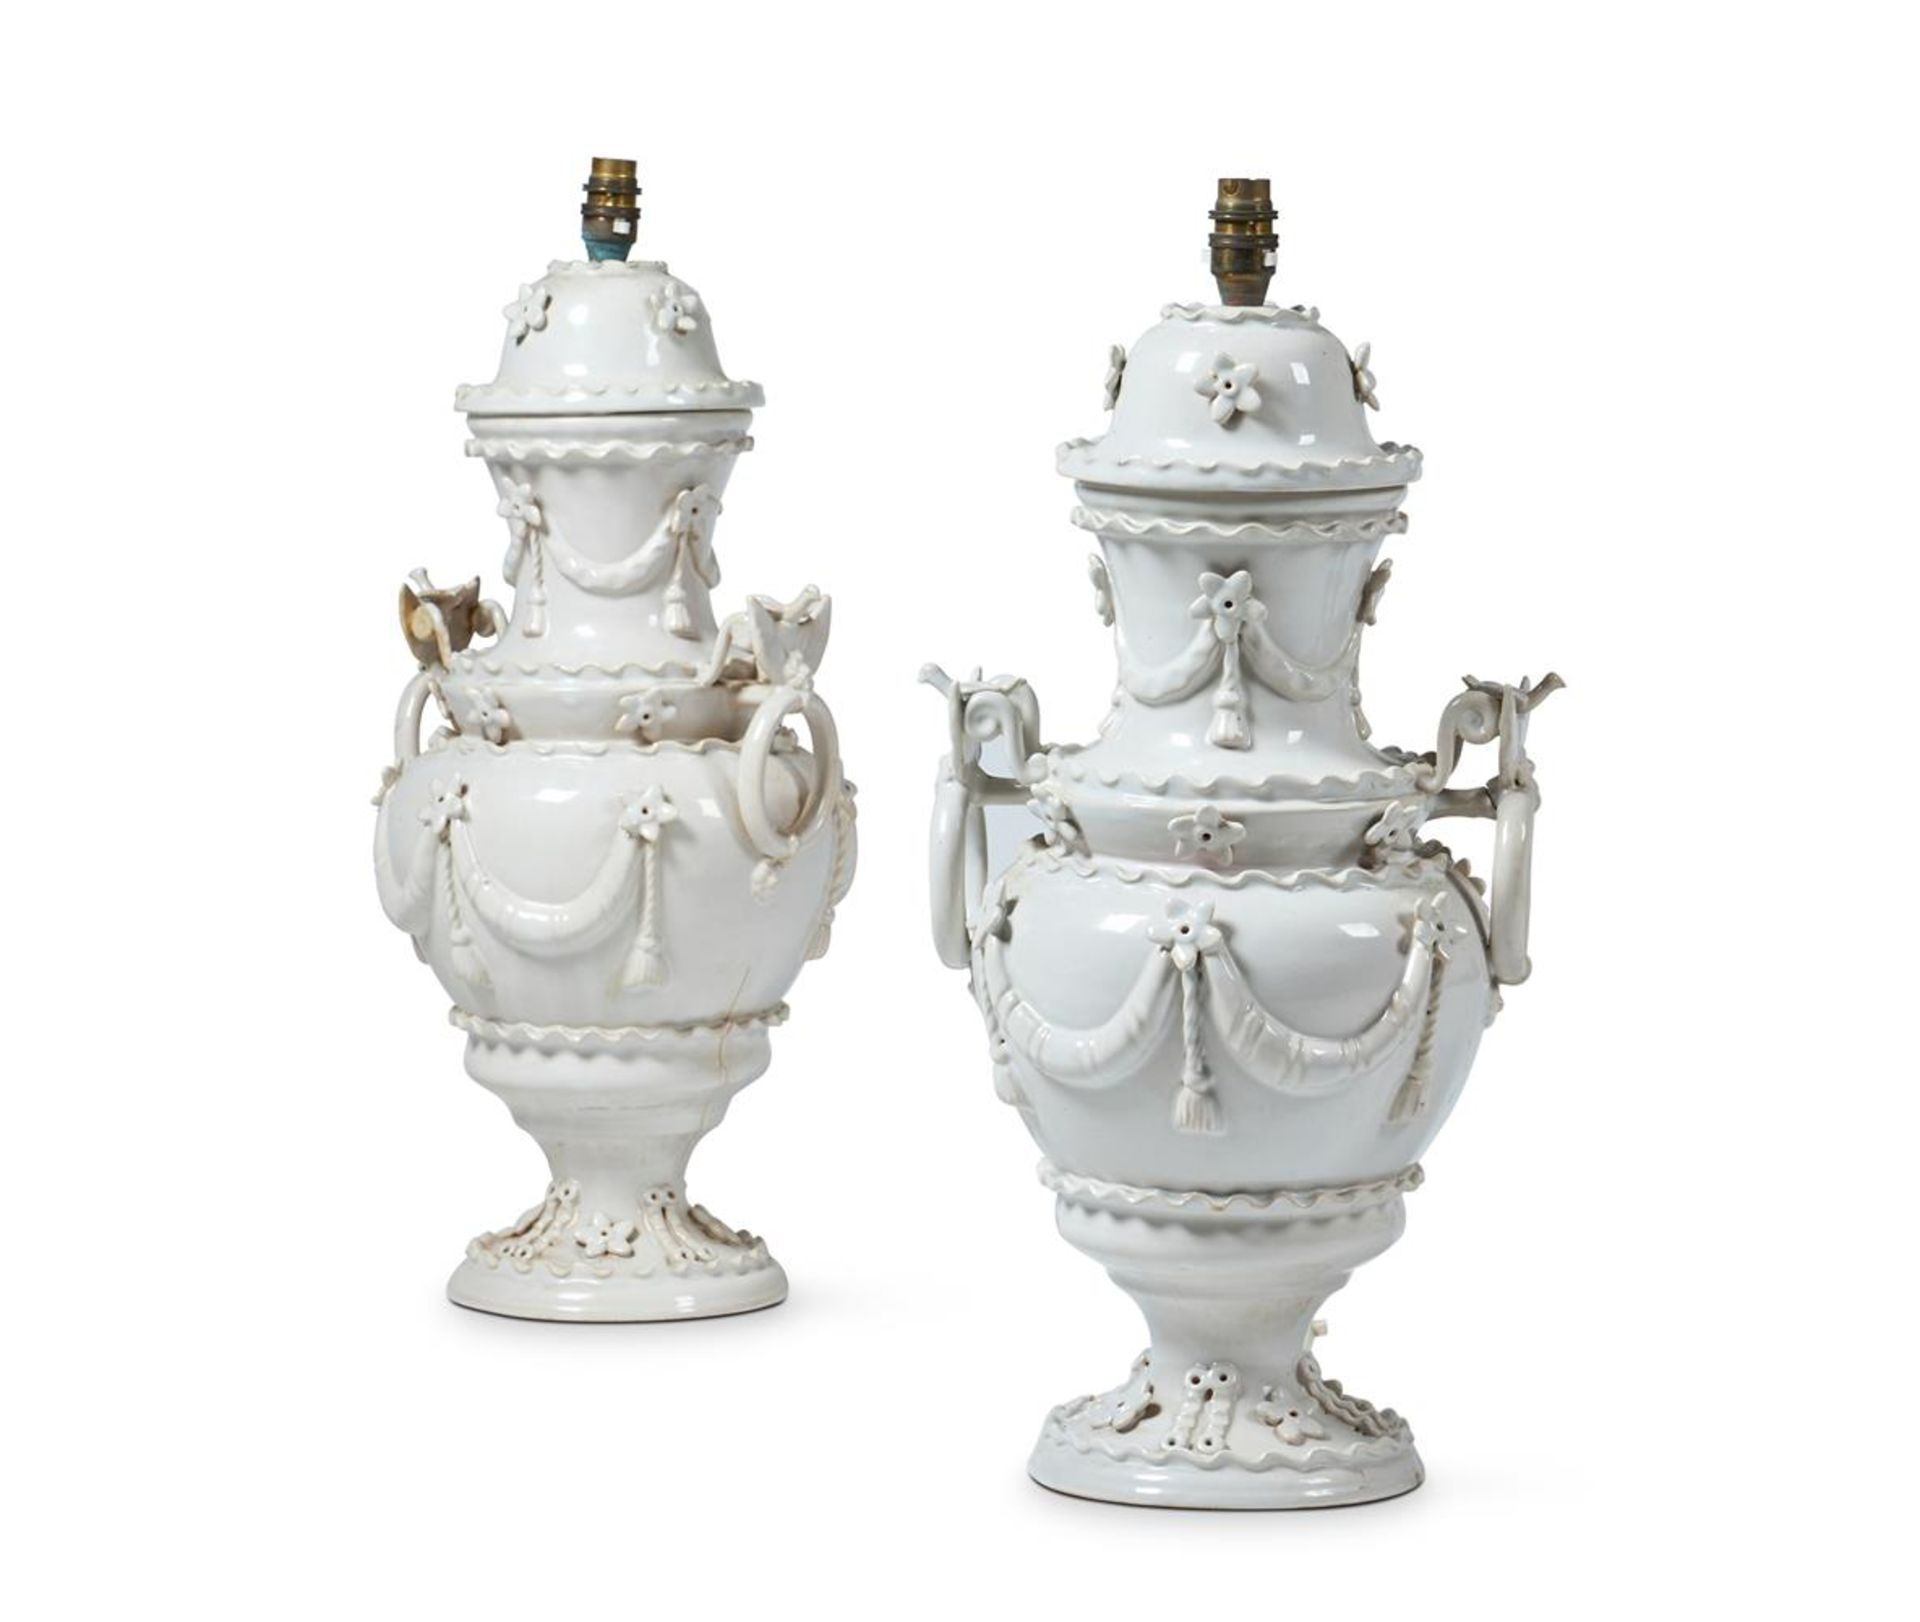 A PAIR OF WHITE GLAZED LAMPS, 20TH CENTURY SPANISH